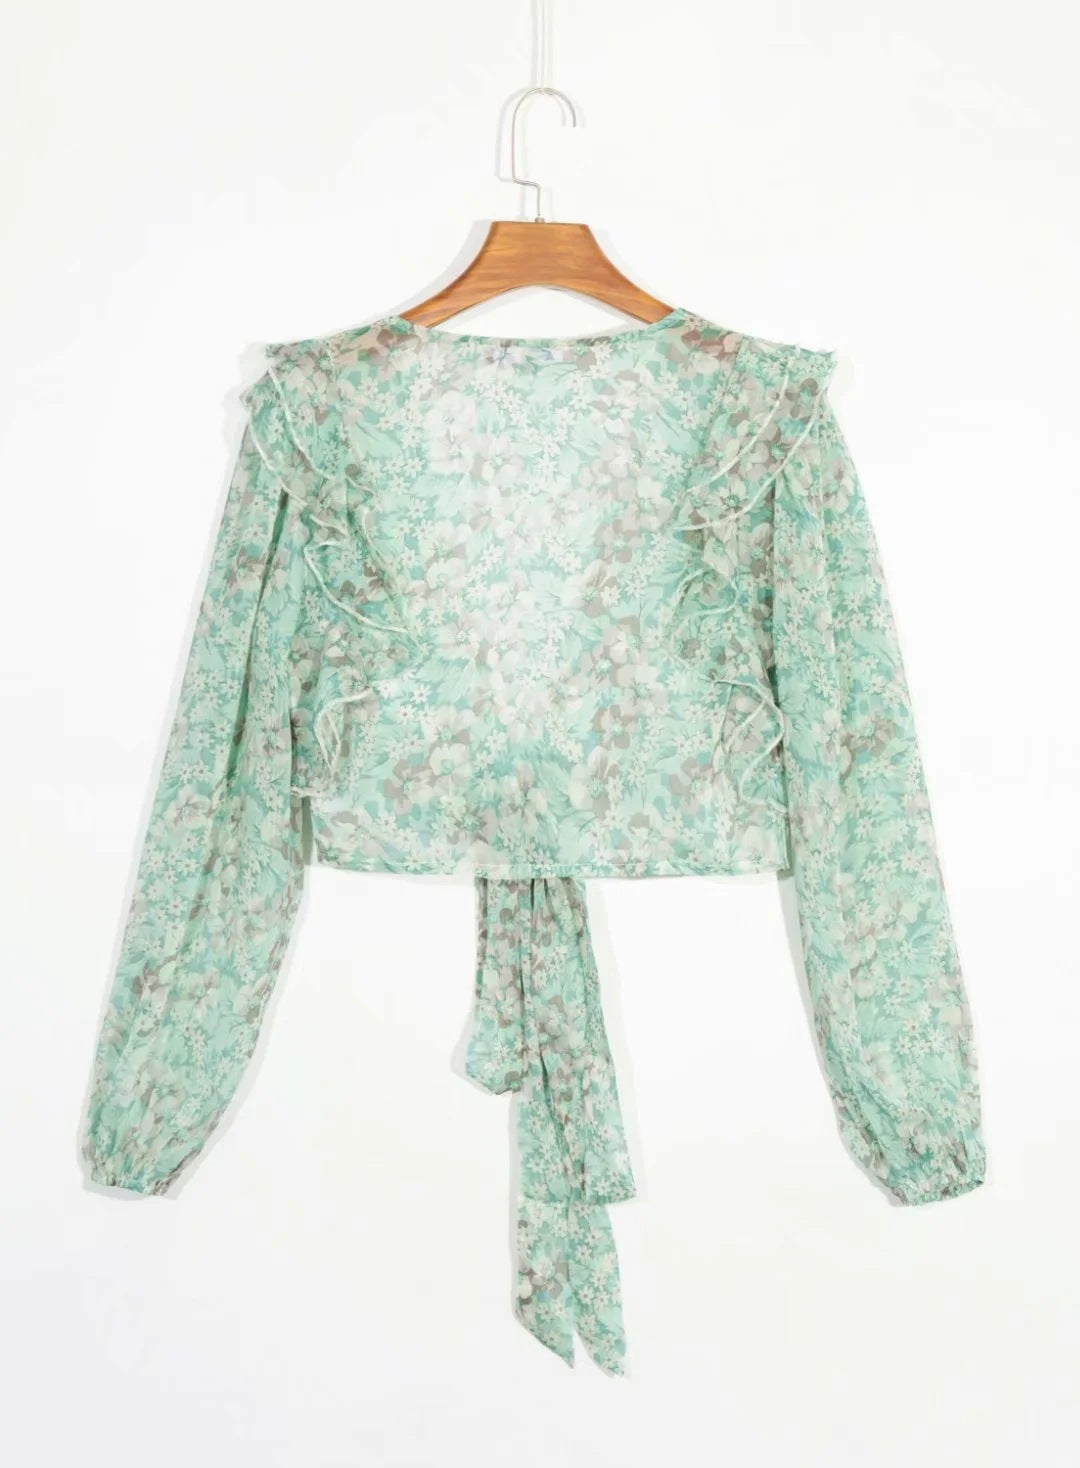 Floral print blouse with long sleeves and deep V-neck tie